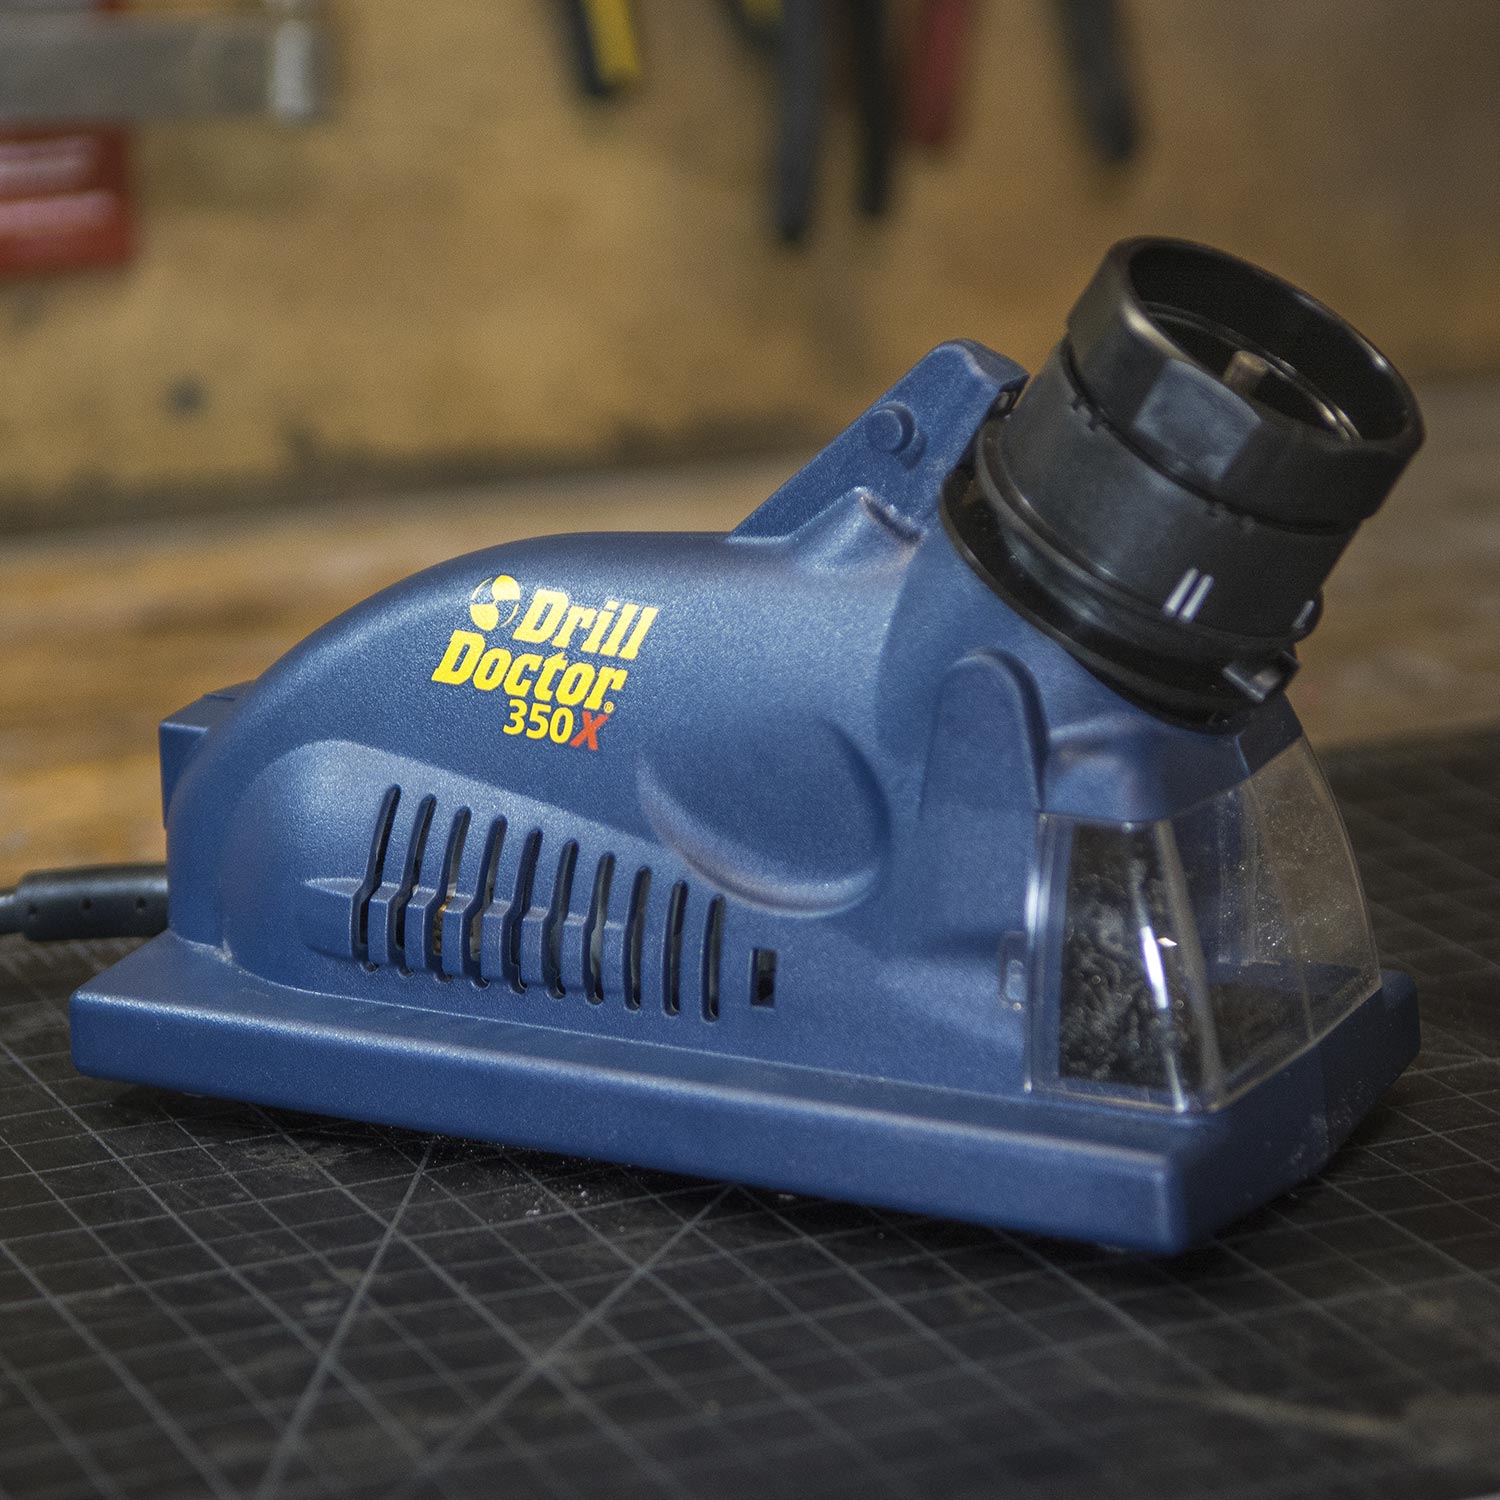 Drill Doctor X2 Drill Bit and Knife Sharpener Review - Pro Tool